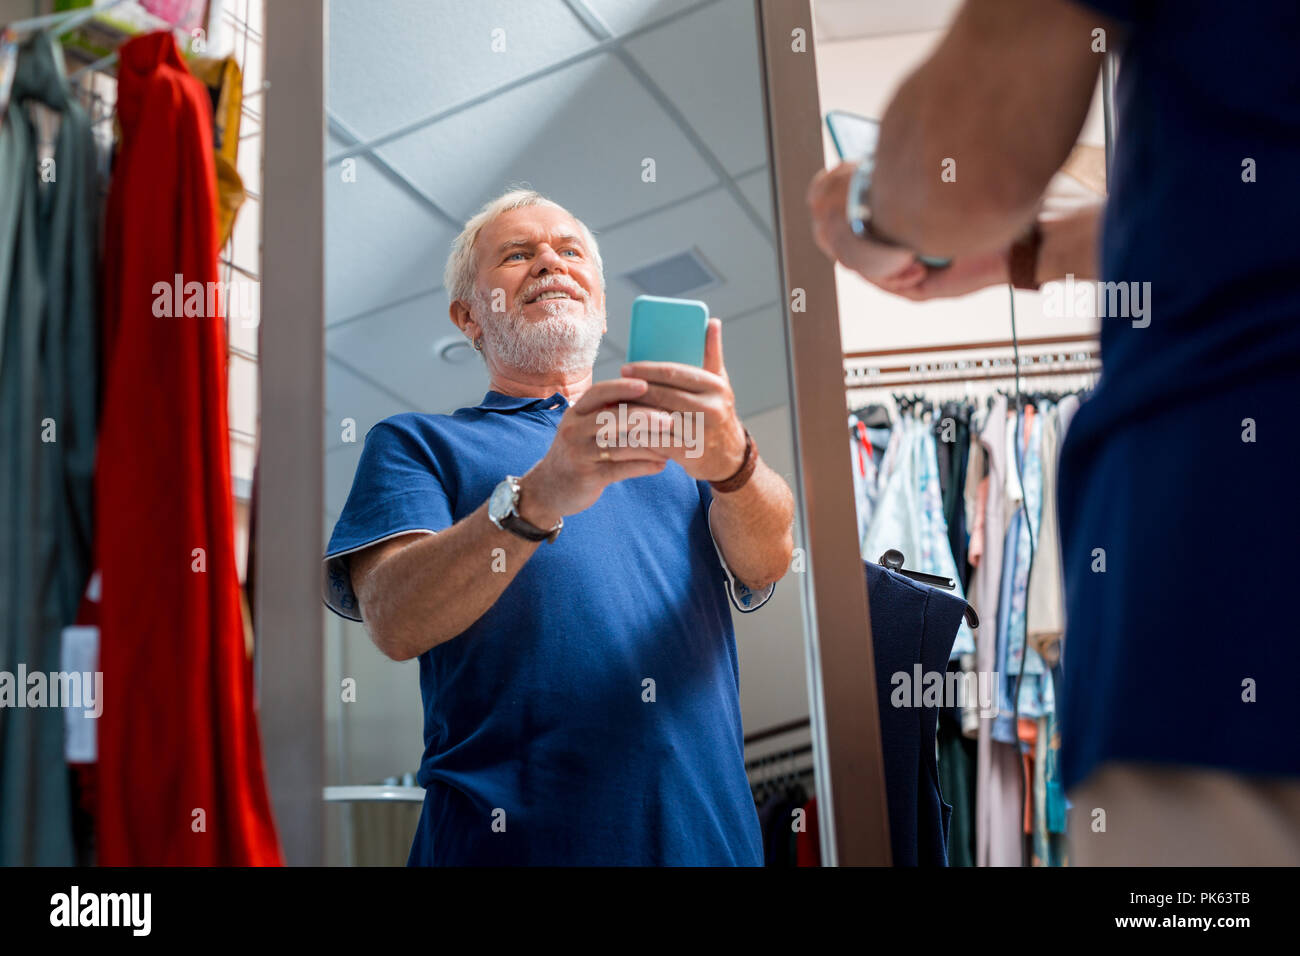 Joyful grey haired man admiring his reflection in shopping store Stock Photo